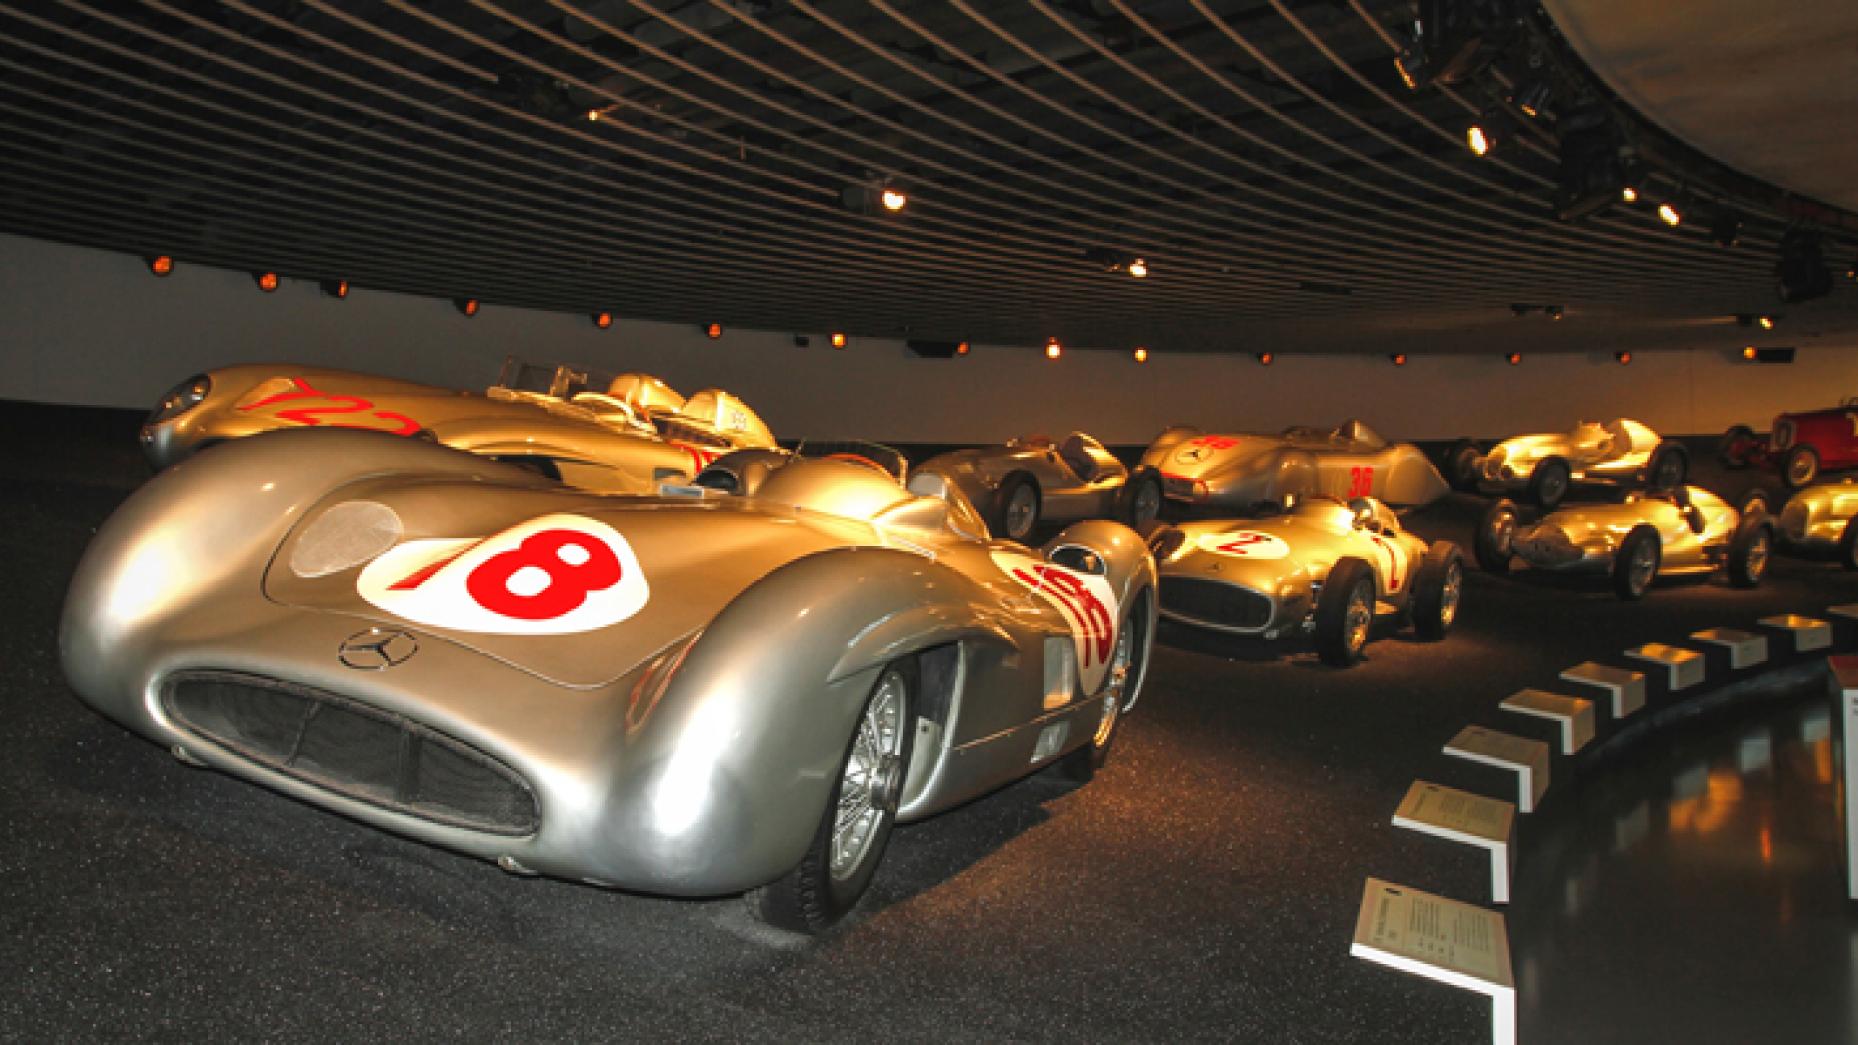 MERCEDES-BENZ RACING CARS: You need all of these cars in your life.